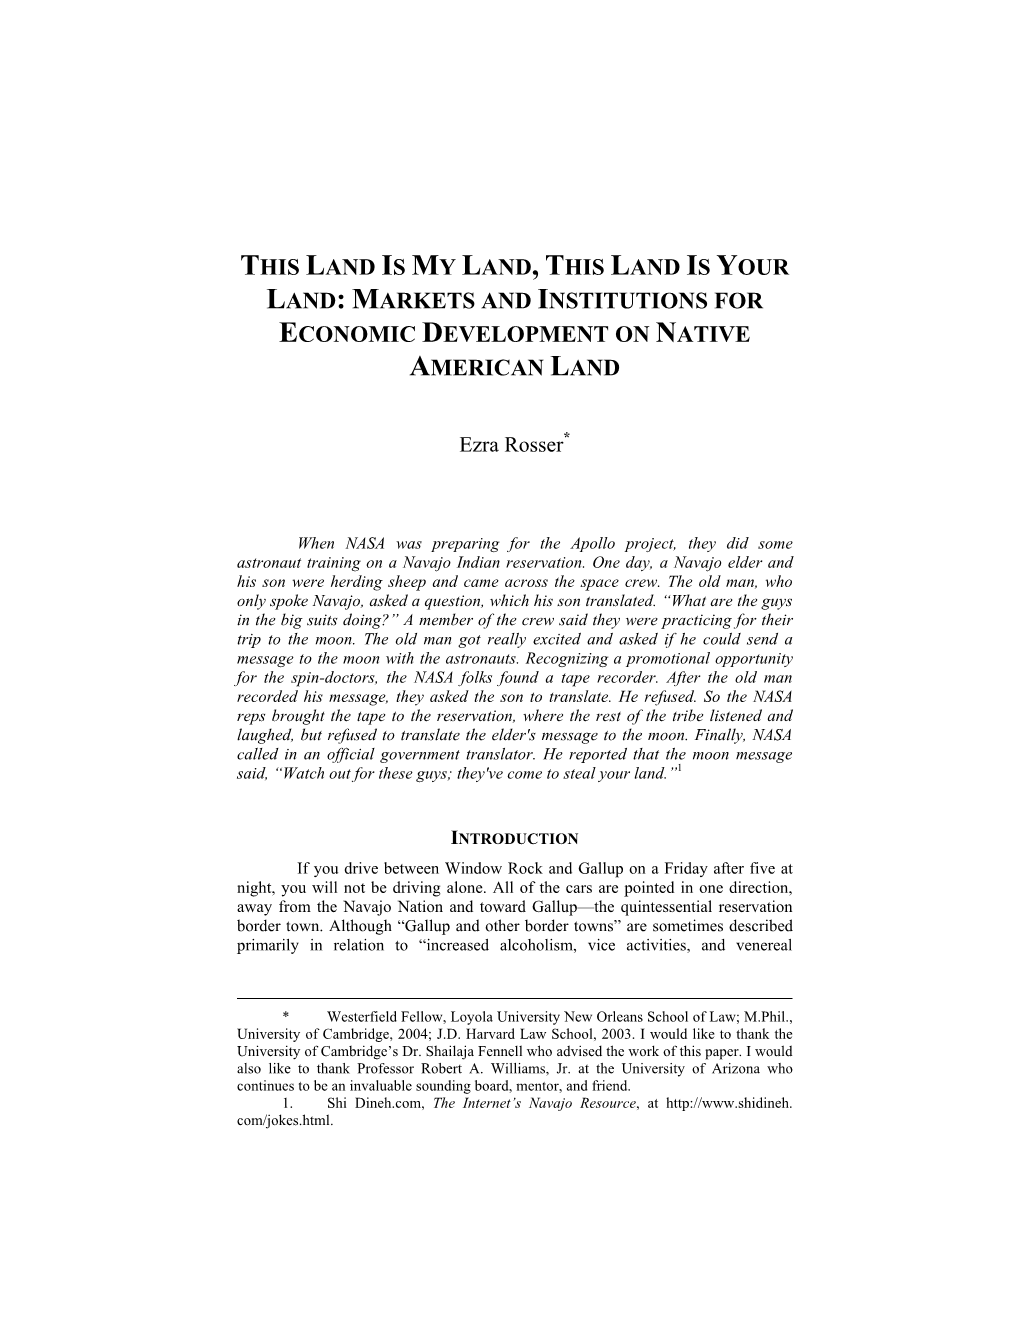 Markets and Institutions for Economic Development on Native American Land